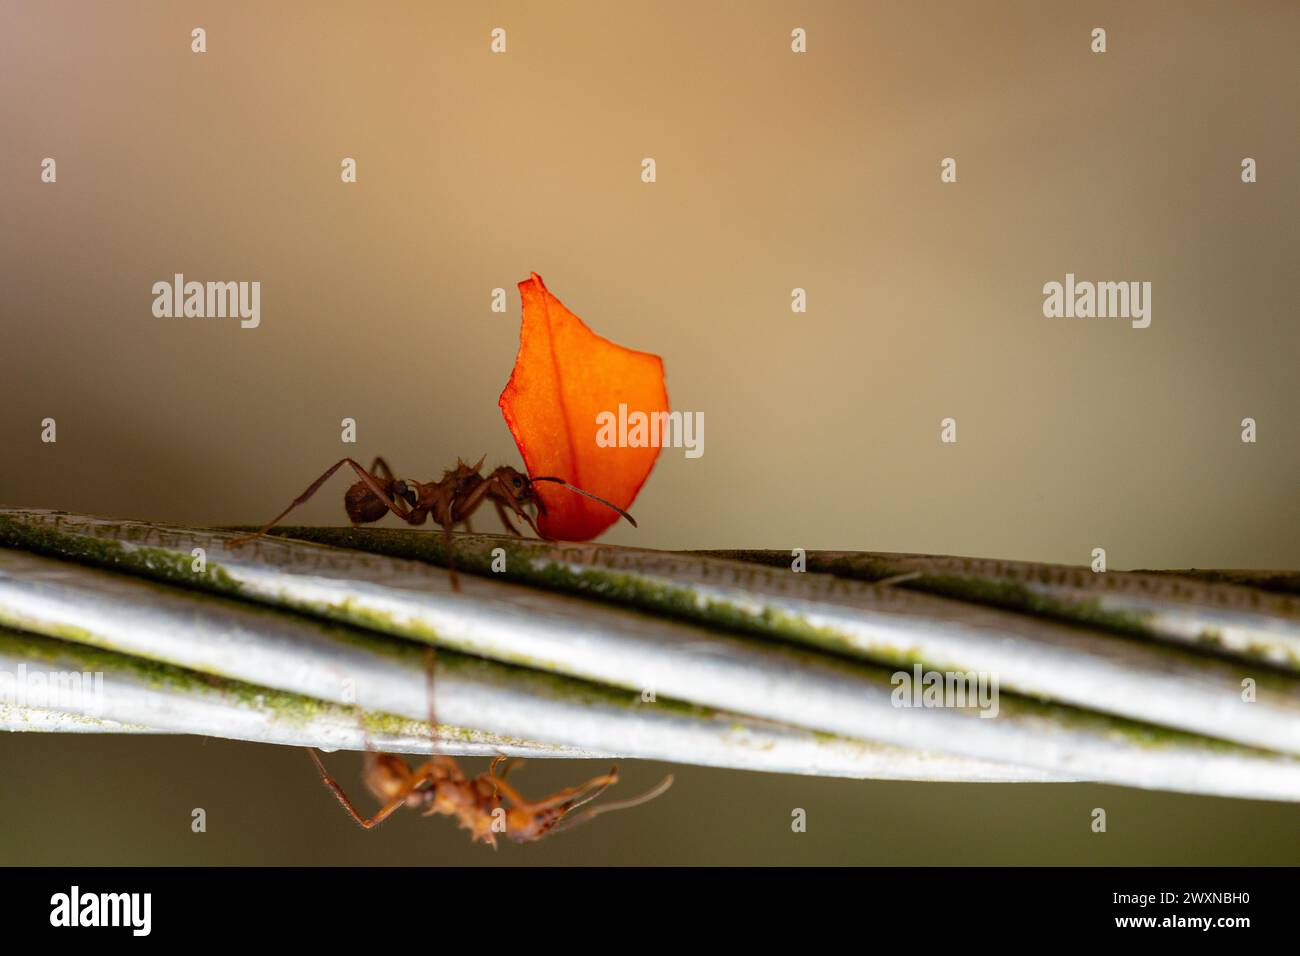 a diligent leafcutter ant showcases its strength by transporting a bright orange petal across a wire, a display of nature's wonders Stock Photo